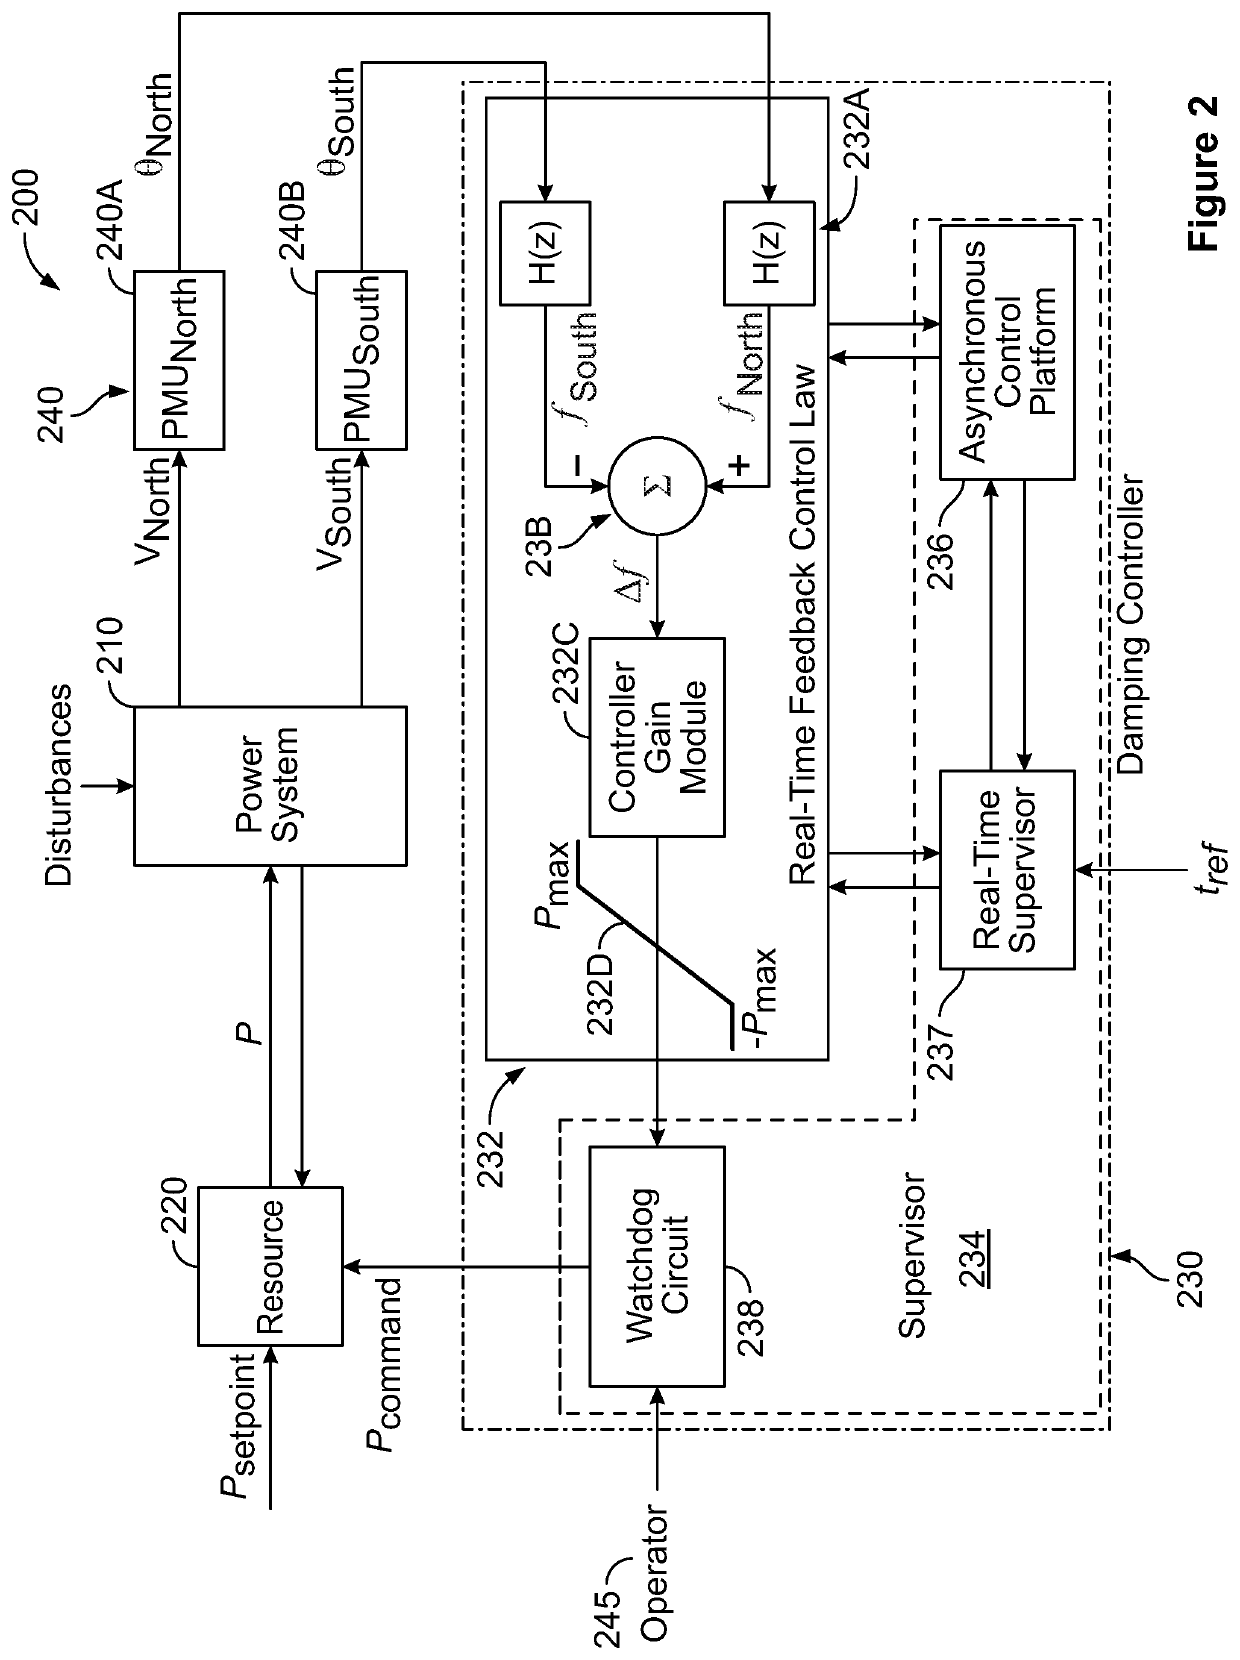 Systems and methods for controlling electrical grid resources